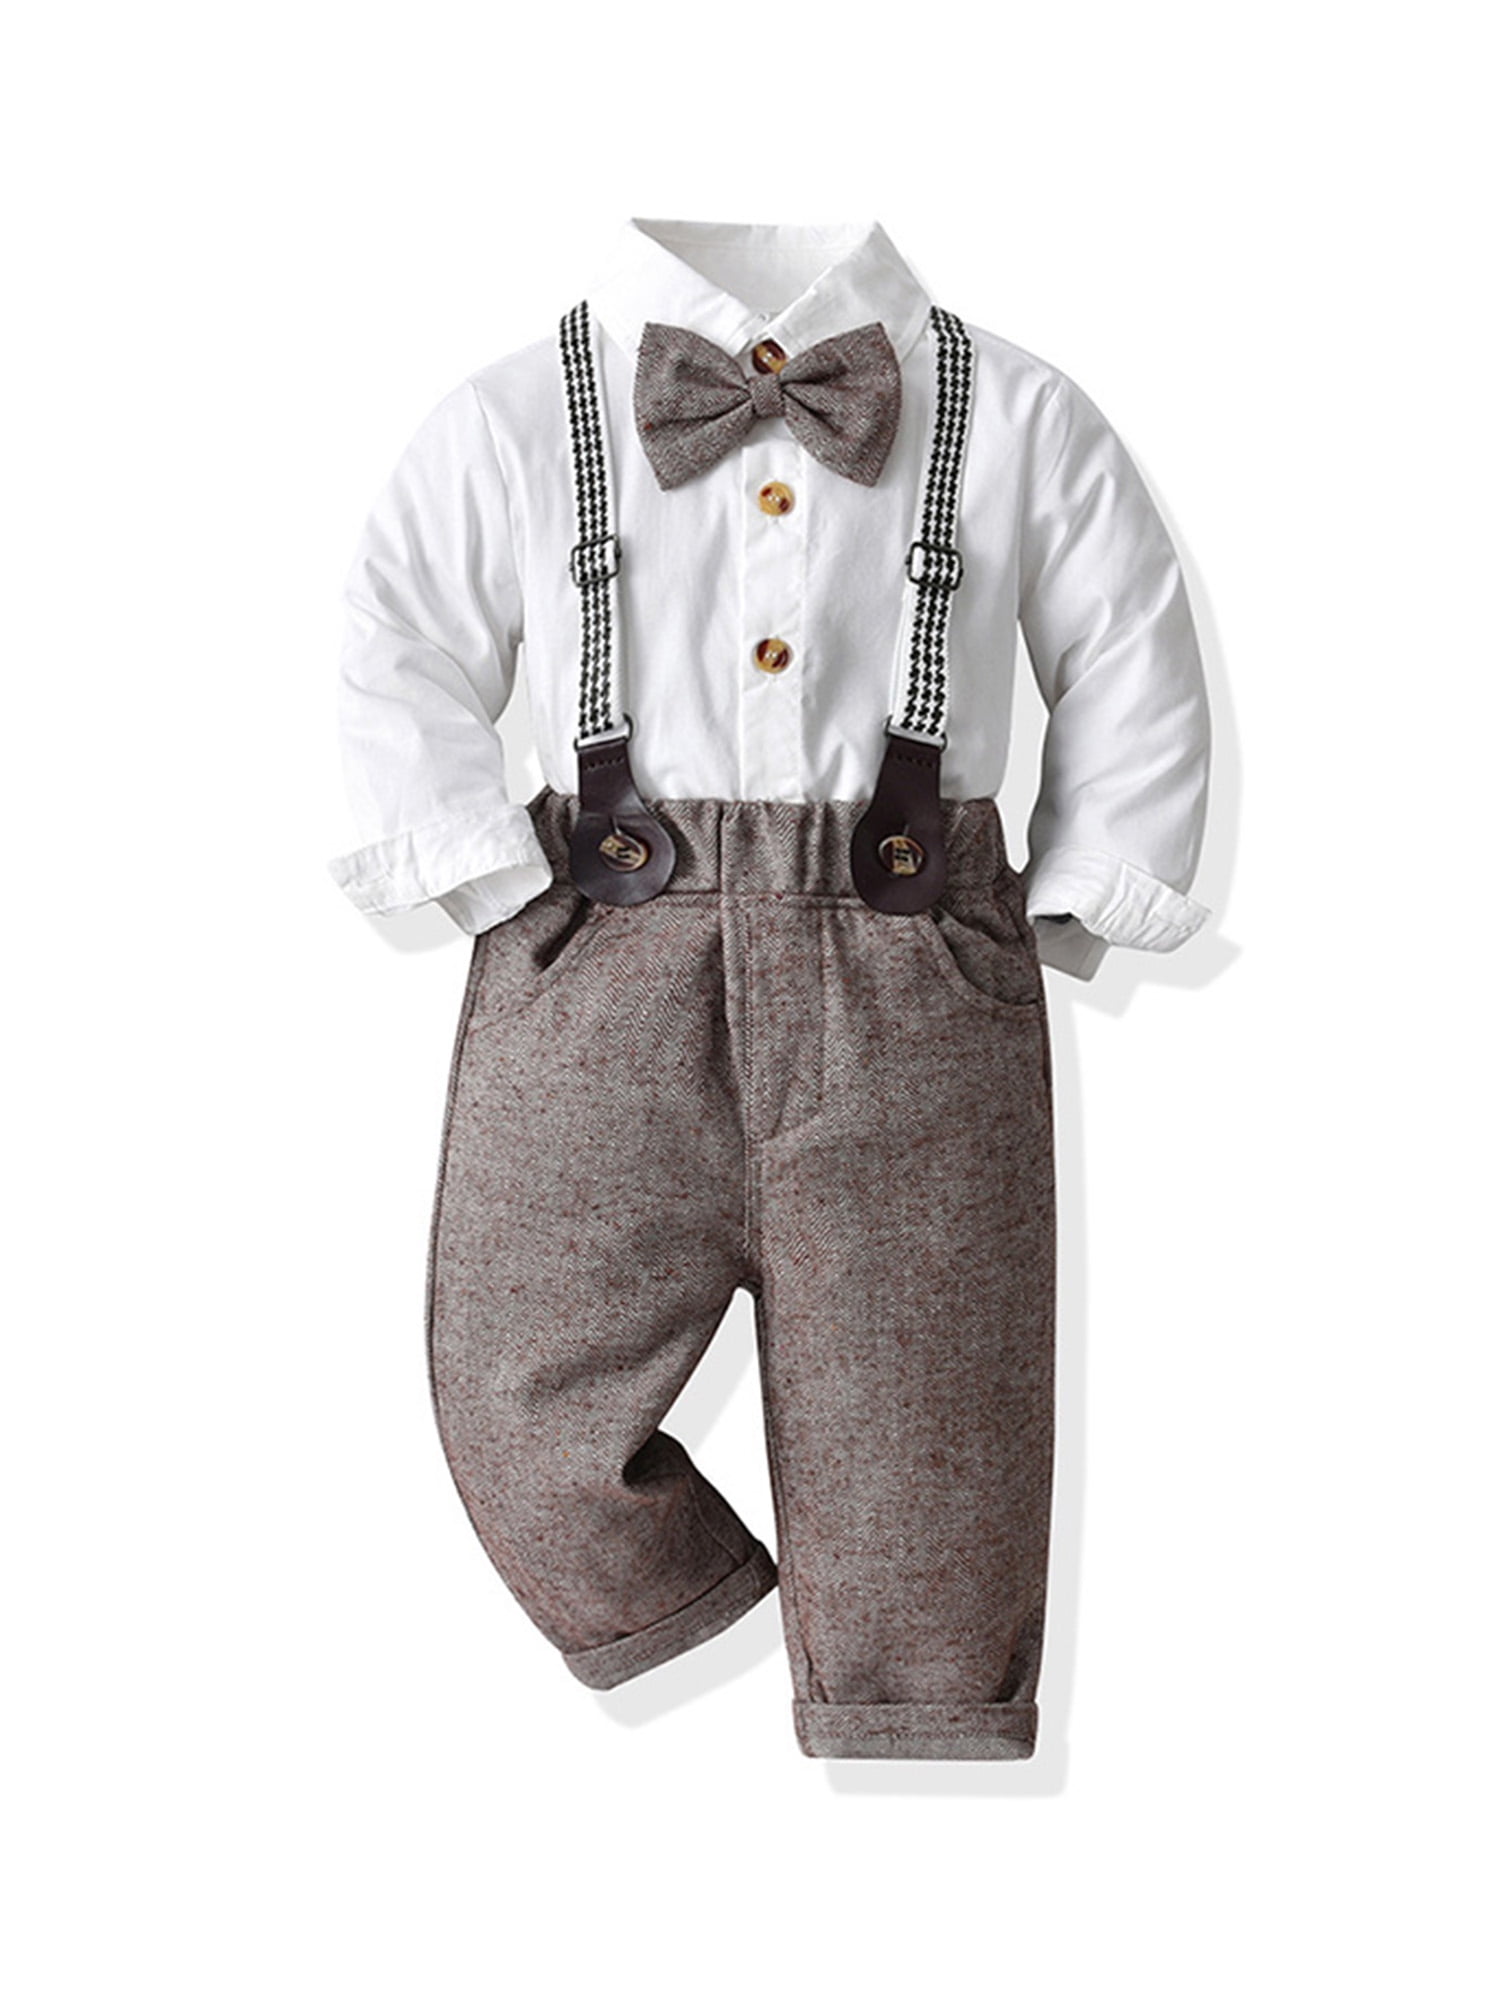 Niuer Boy Clothes Suspender Dressy Outfit Kid Casual Gentleman Suit ...